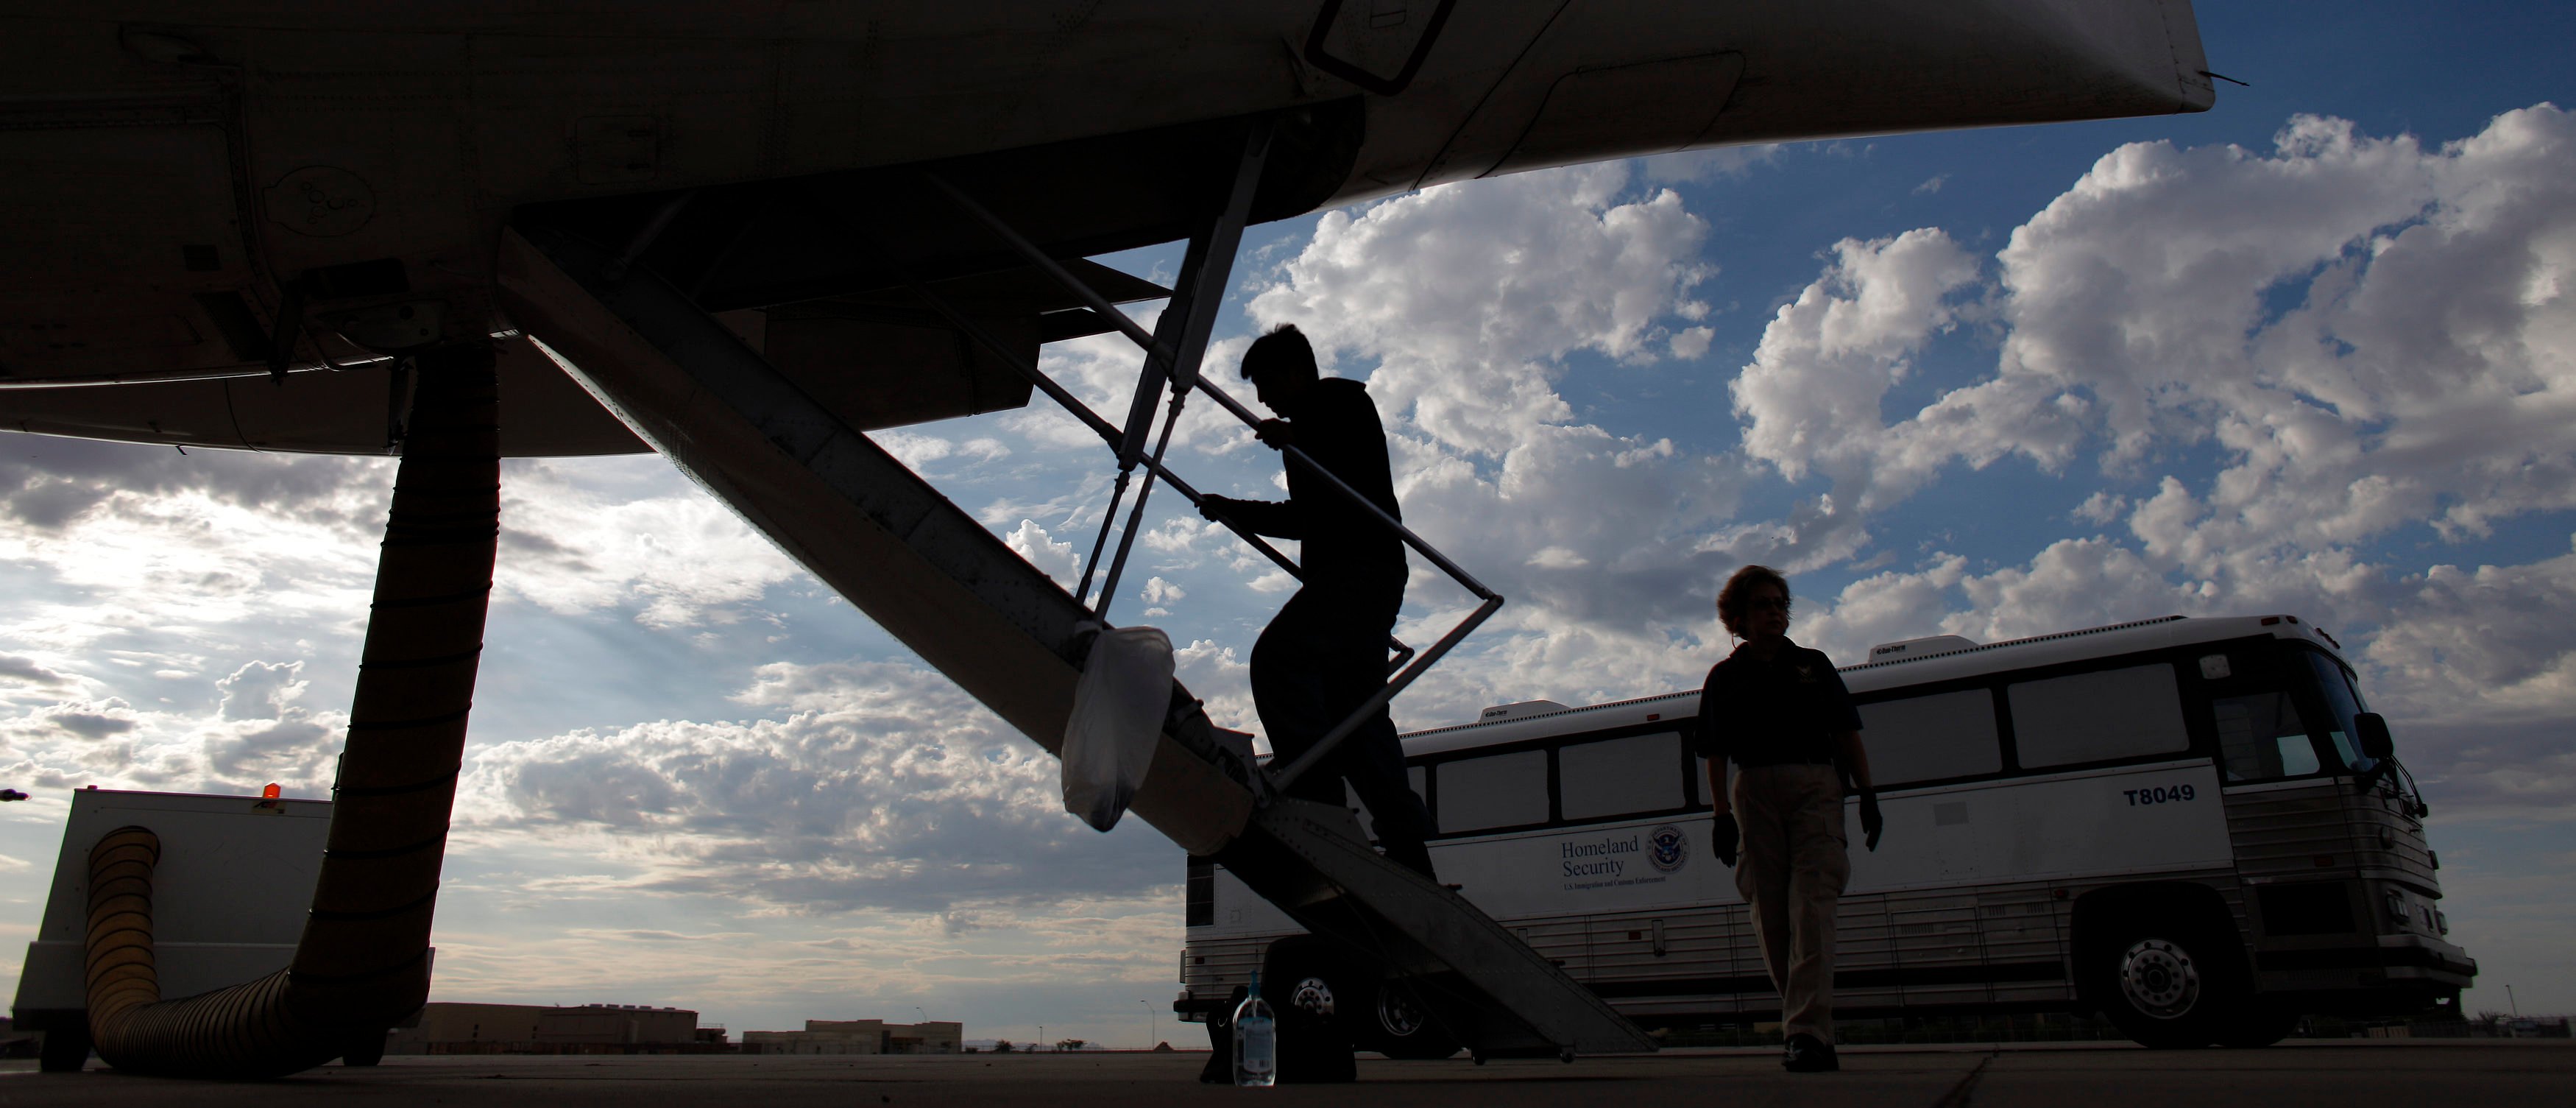 A Guatemalan illegal immigrant boards a plane at a flight operation unit at Mesa airport during his deportation process in Phoenix